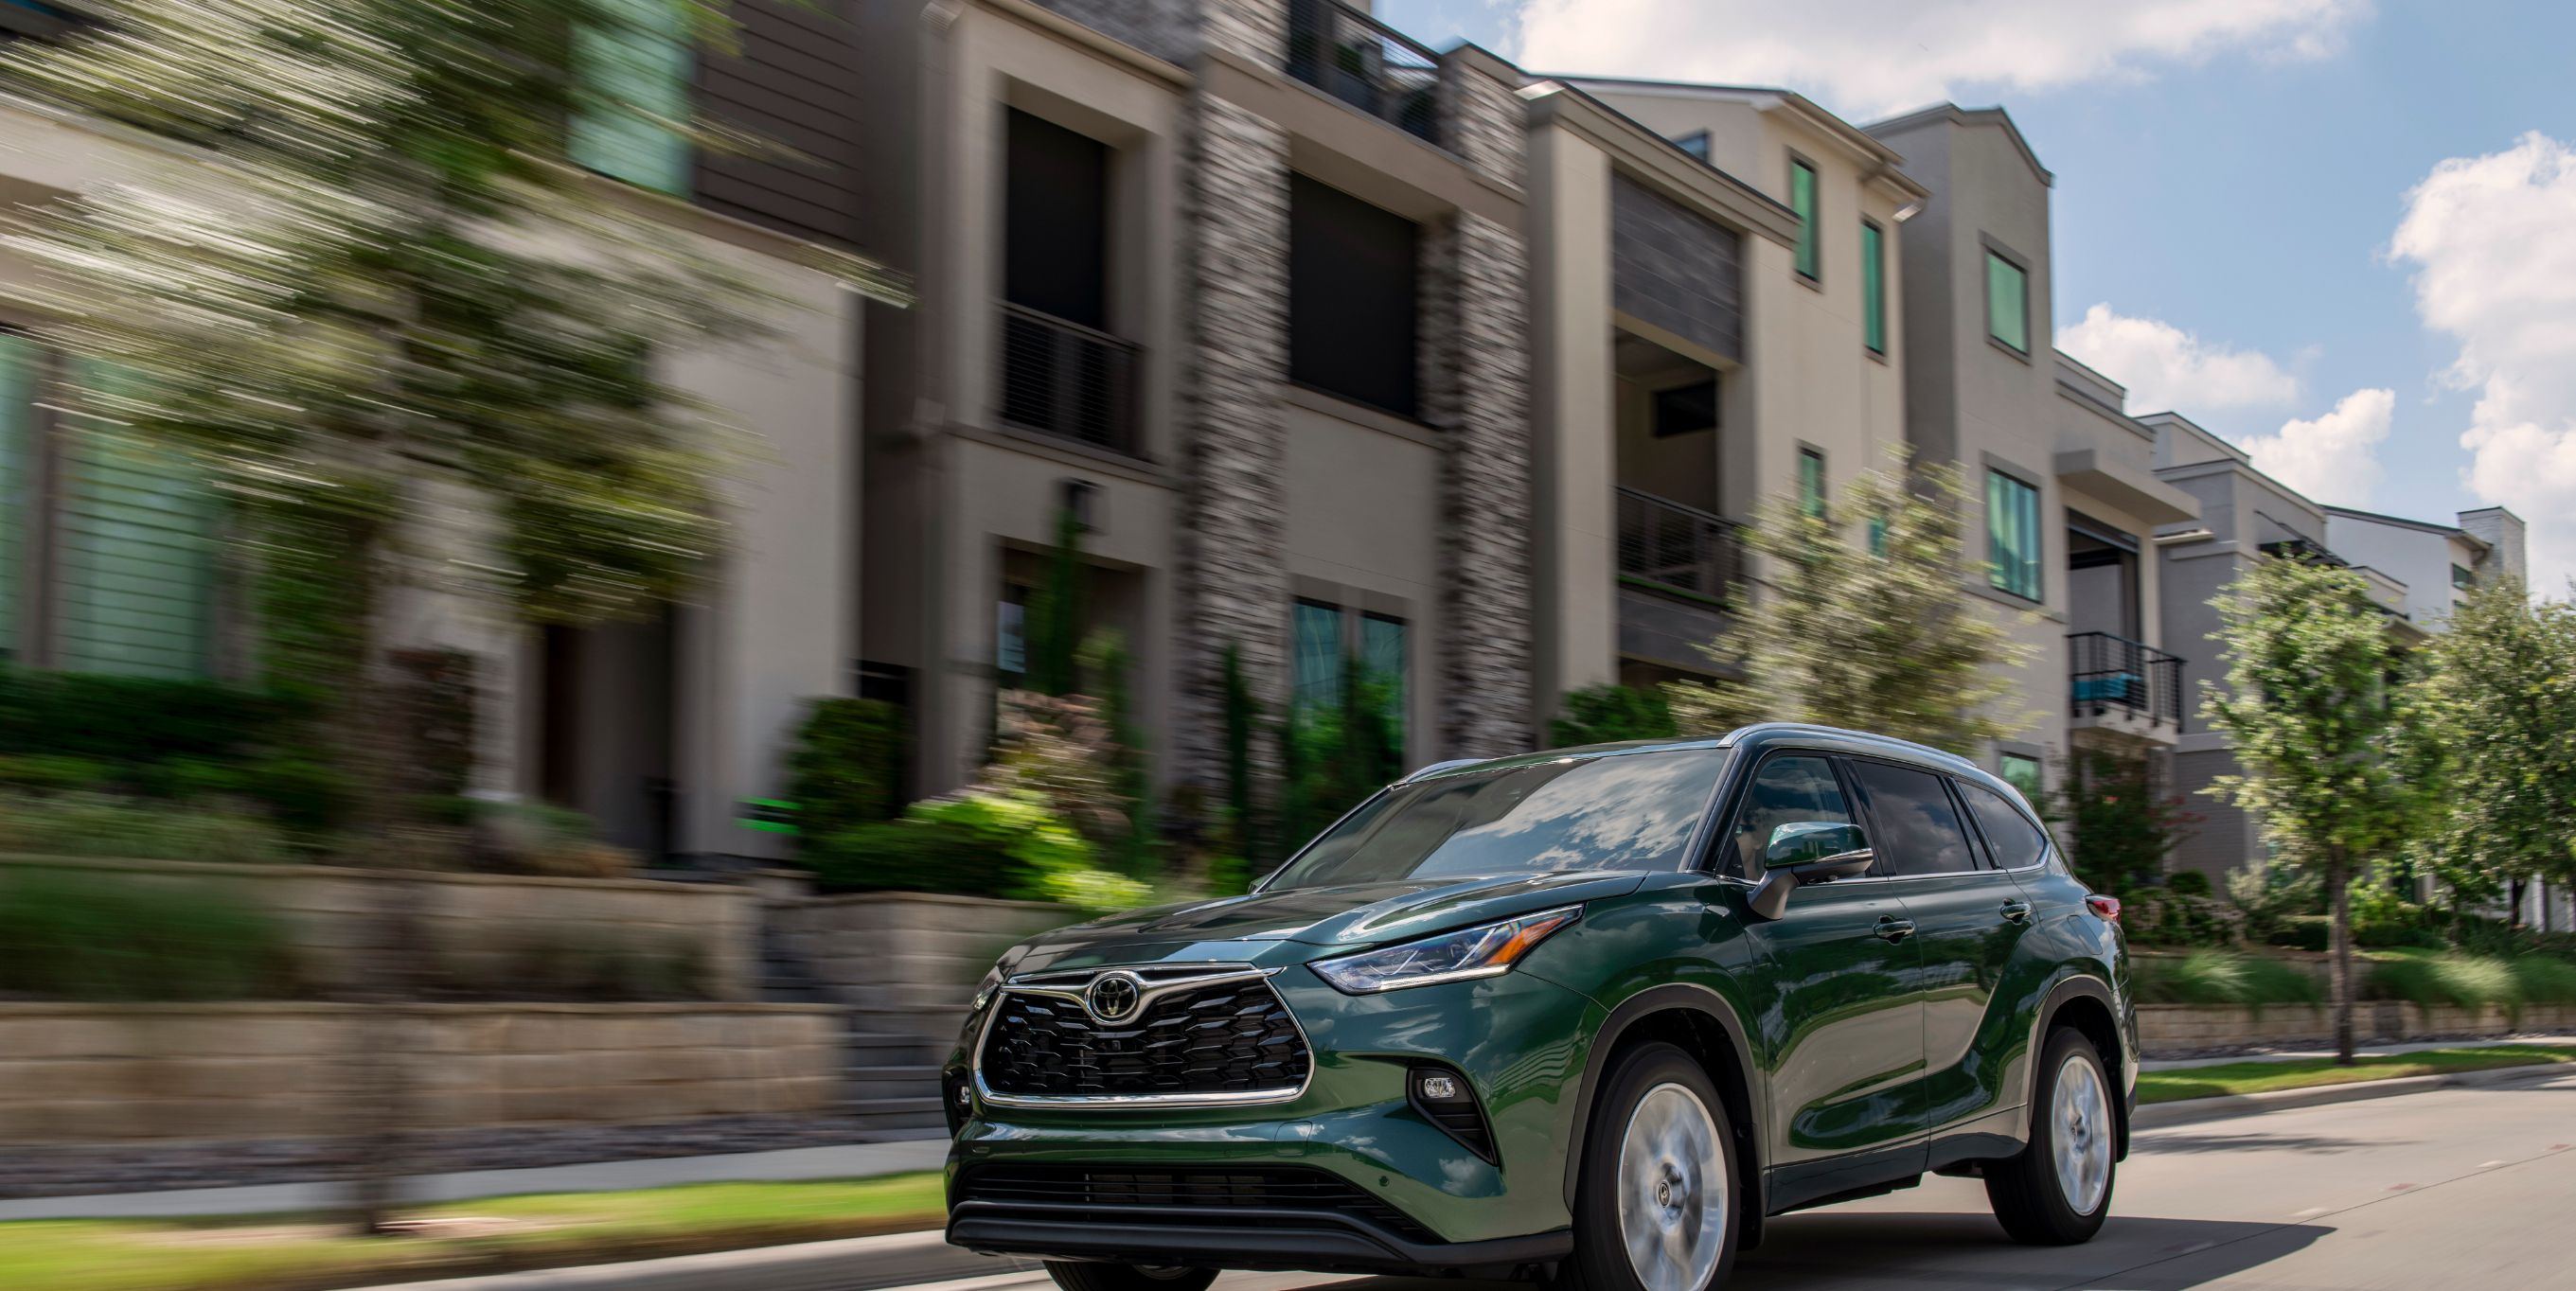 2023 Toyota Highlander Turbocharges the Crossover Experience